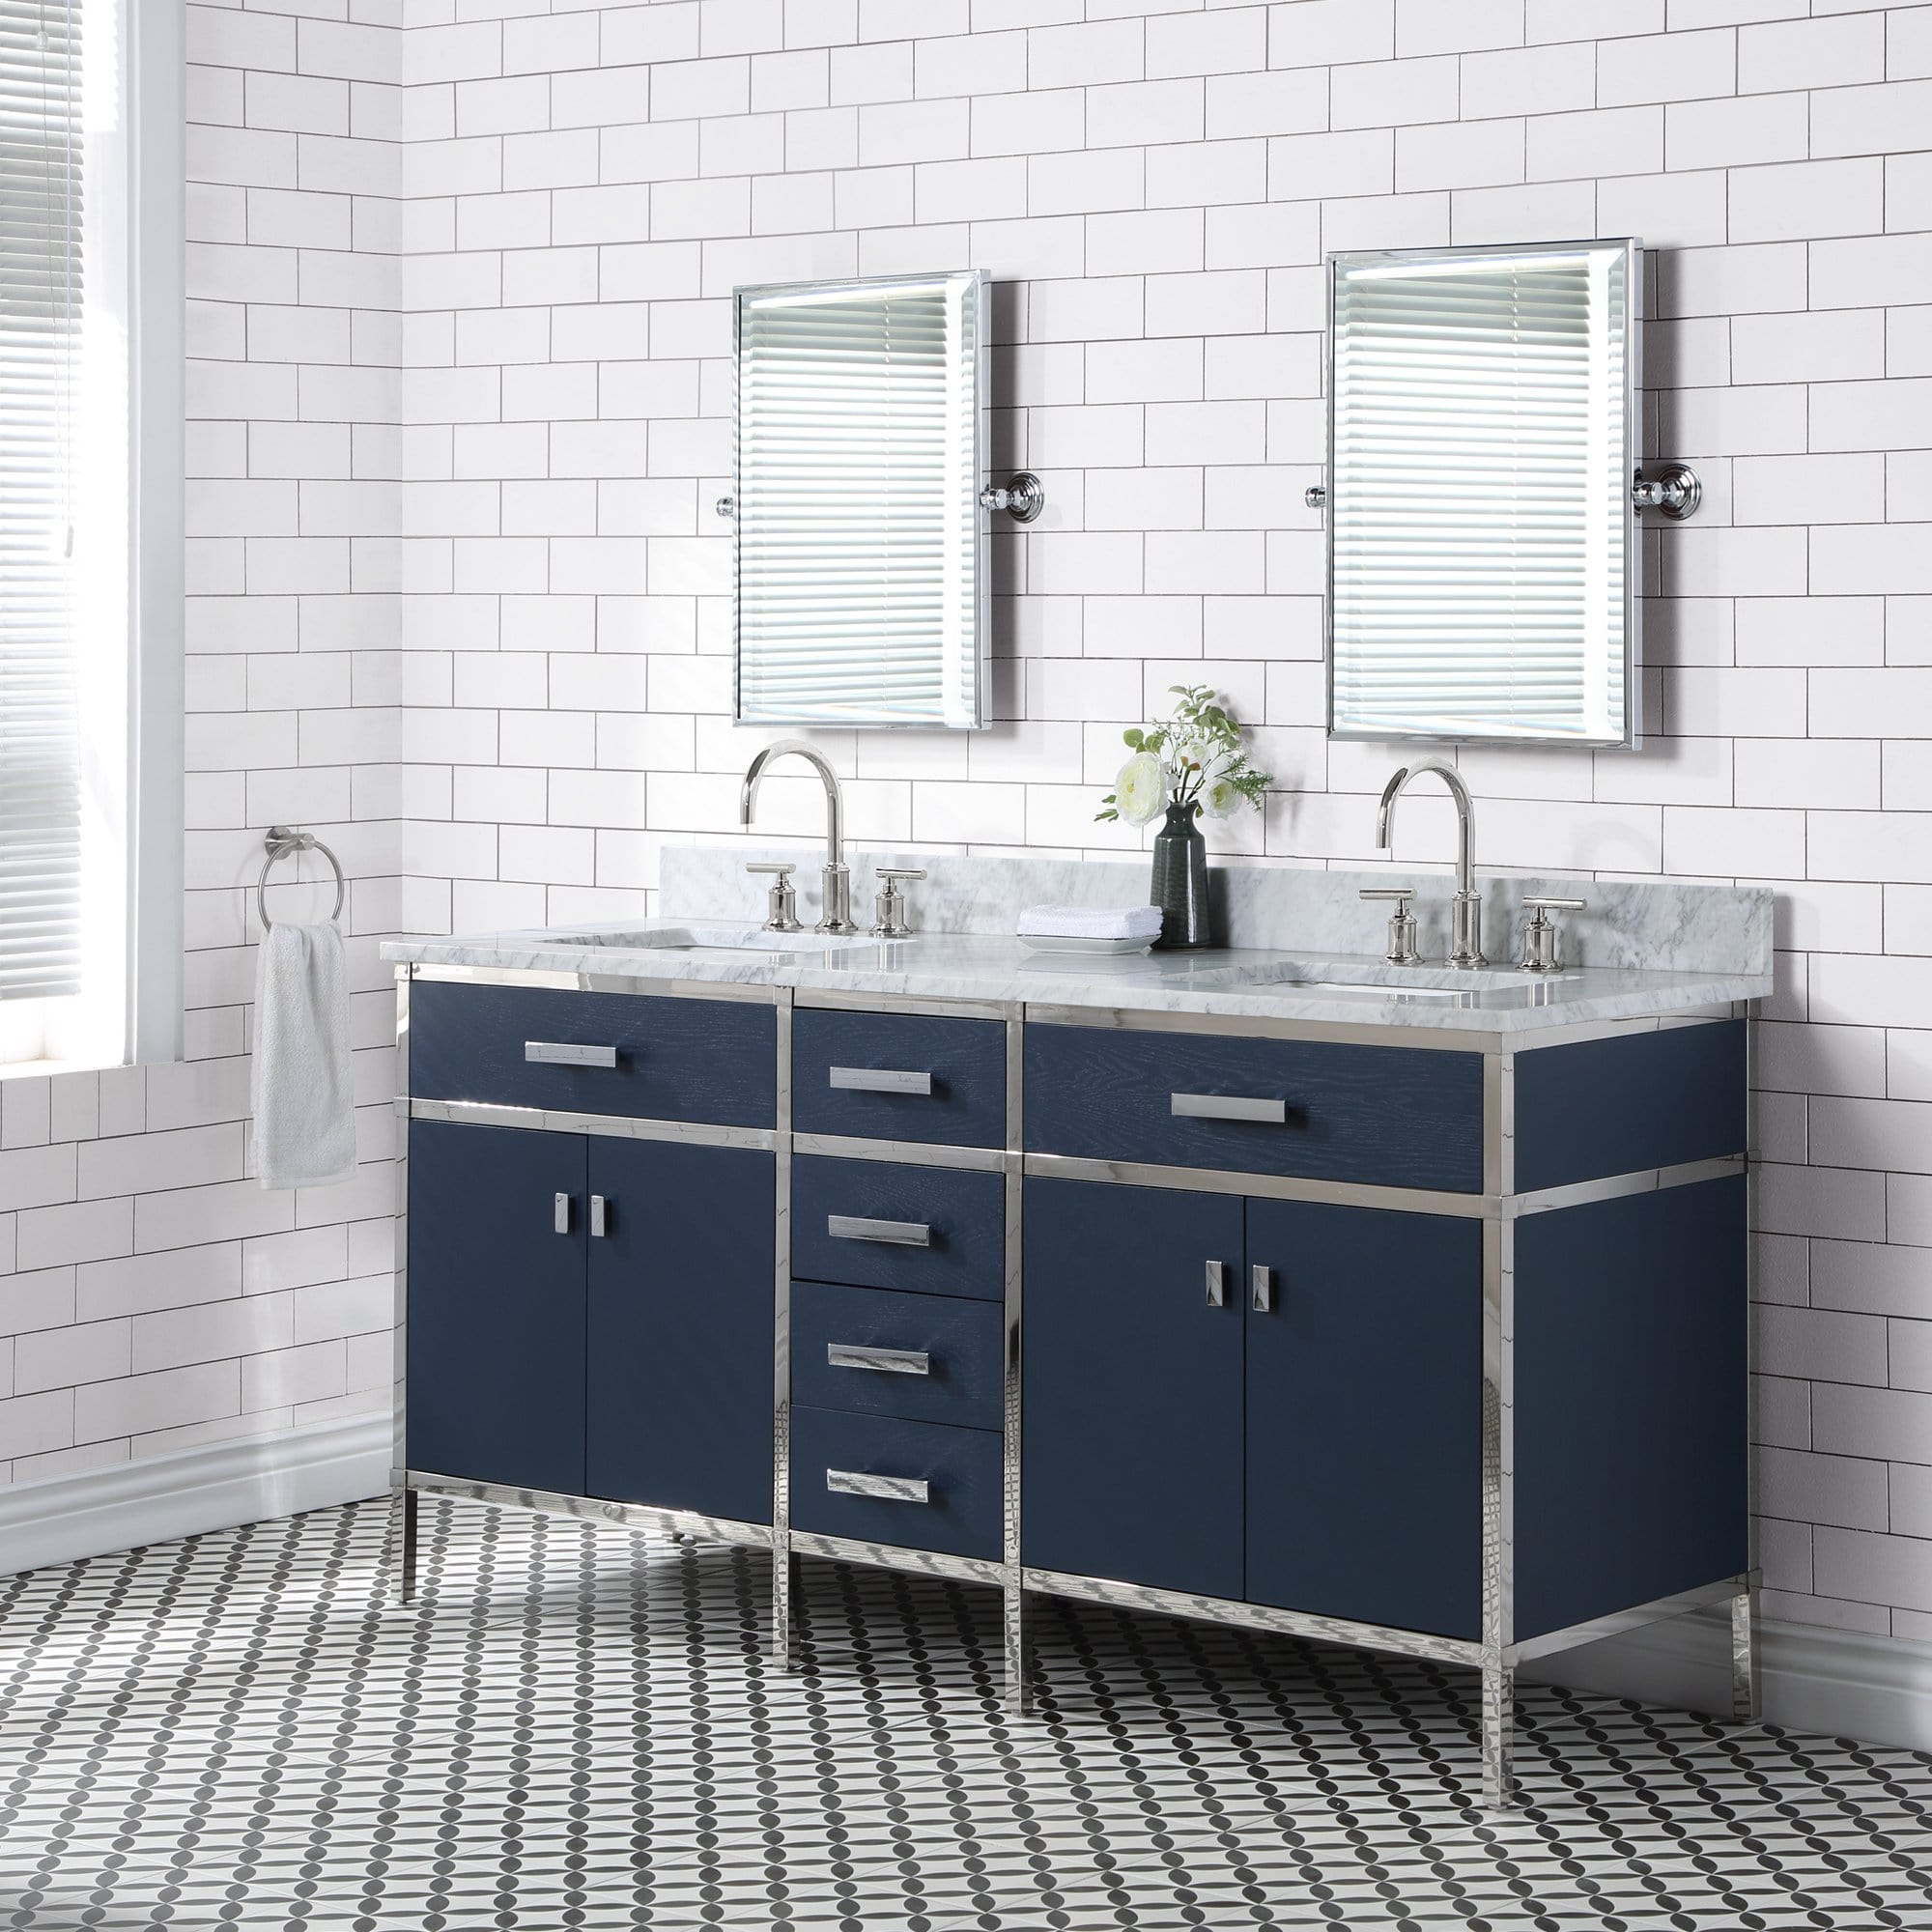 Water Creation Marquis 72 In. Double Sink Carrara White Marble Countertop Vanity in Monarch Blue with Hook Faucets and Mirrors - Molaix732030765993Bathroom vanityMQ72CW01MB-E18BL1401